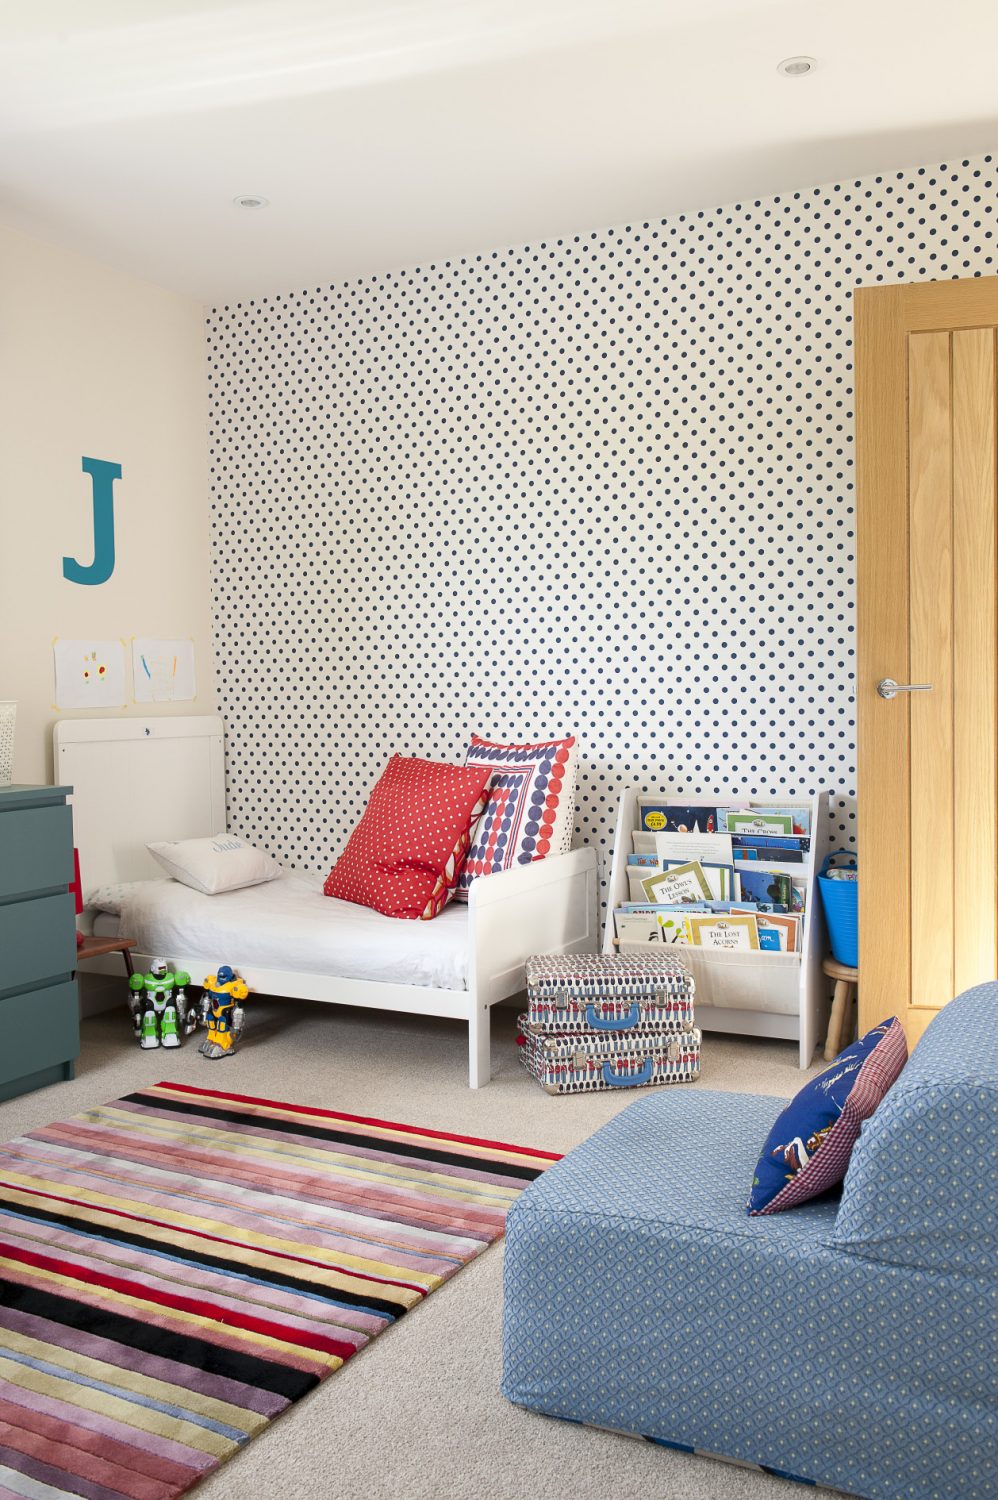 Jenny has papered the twins’ room with navy polka dots